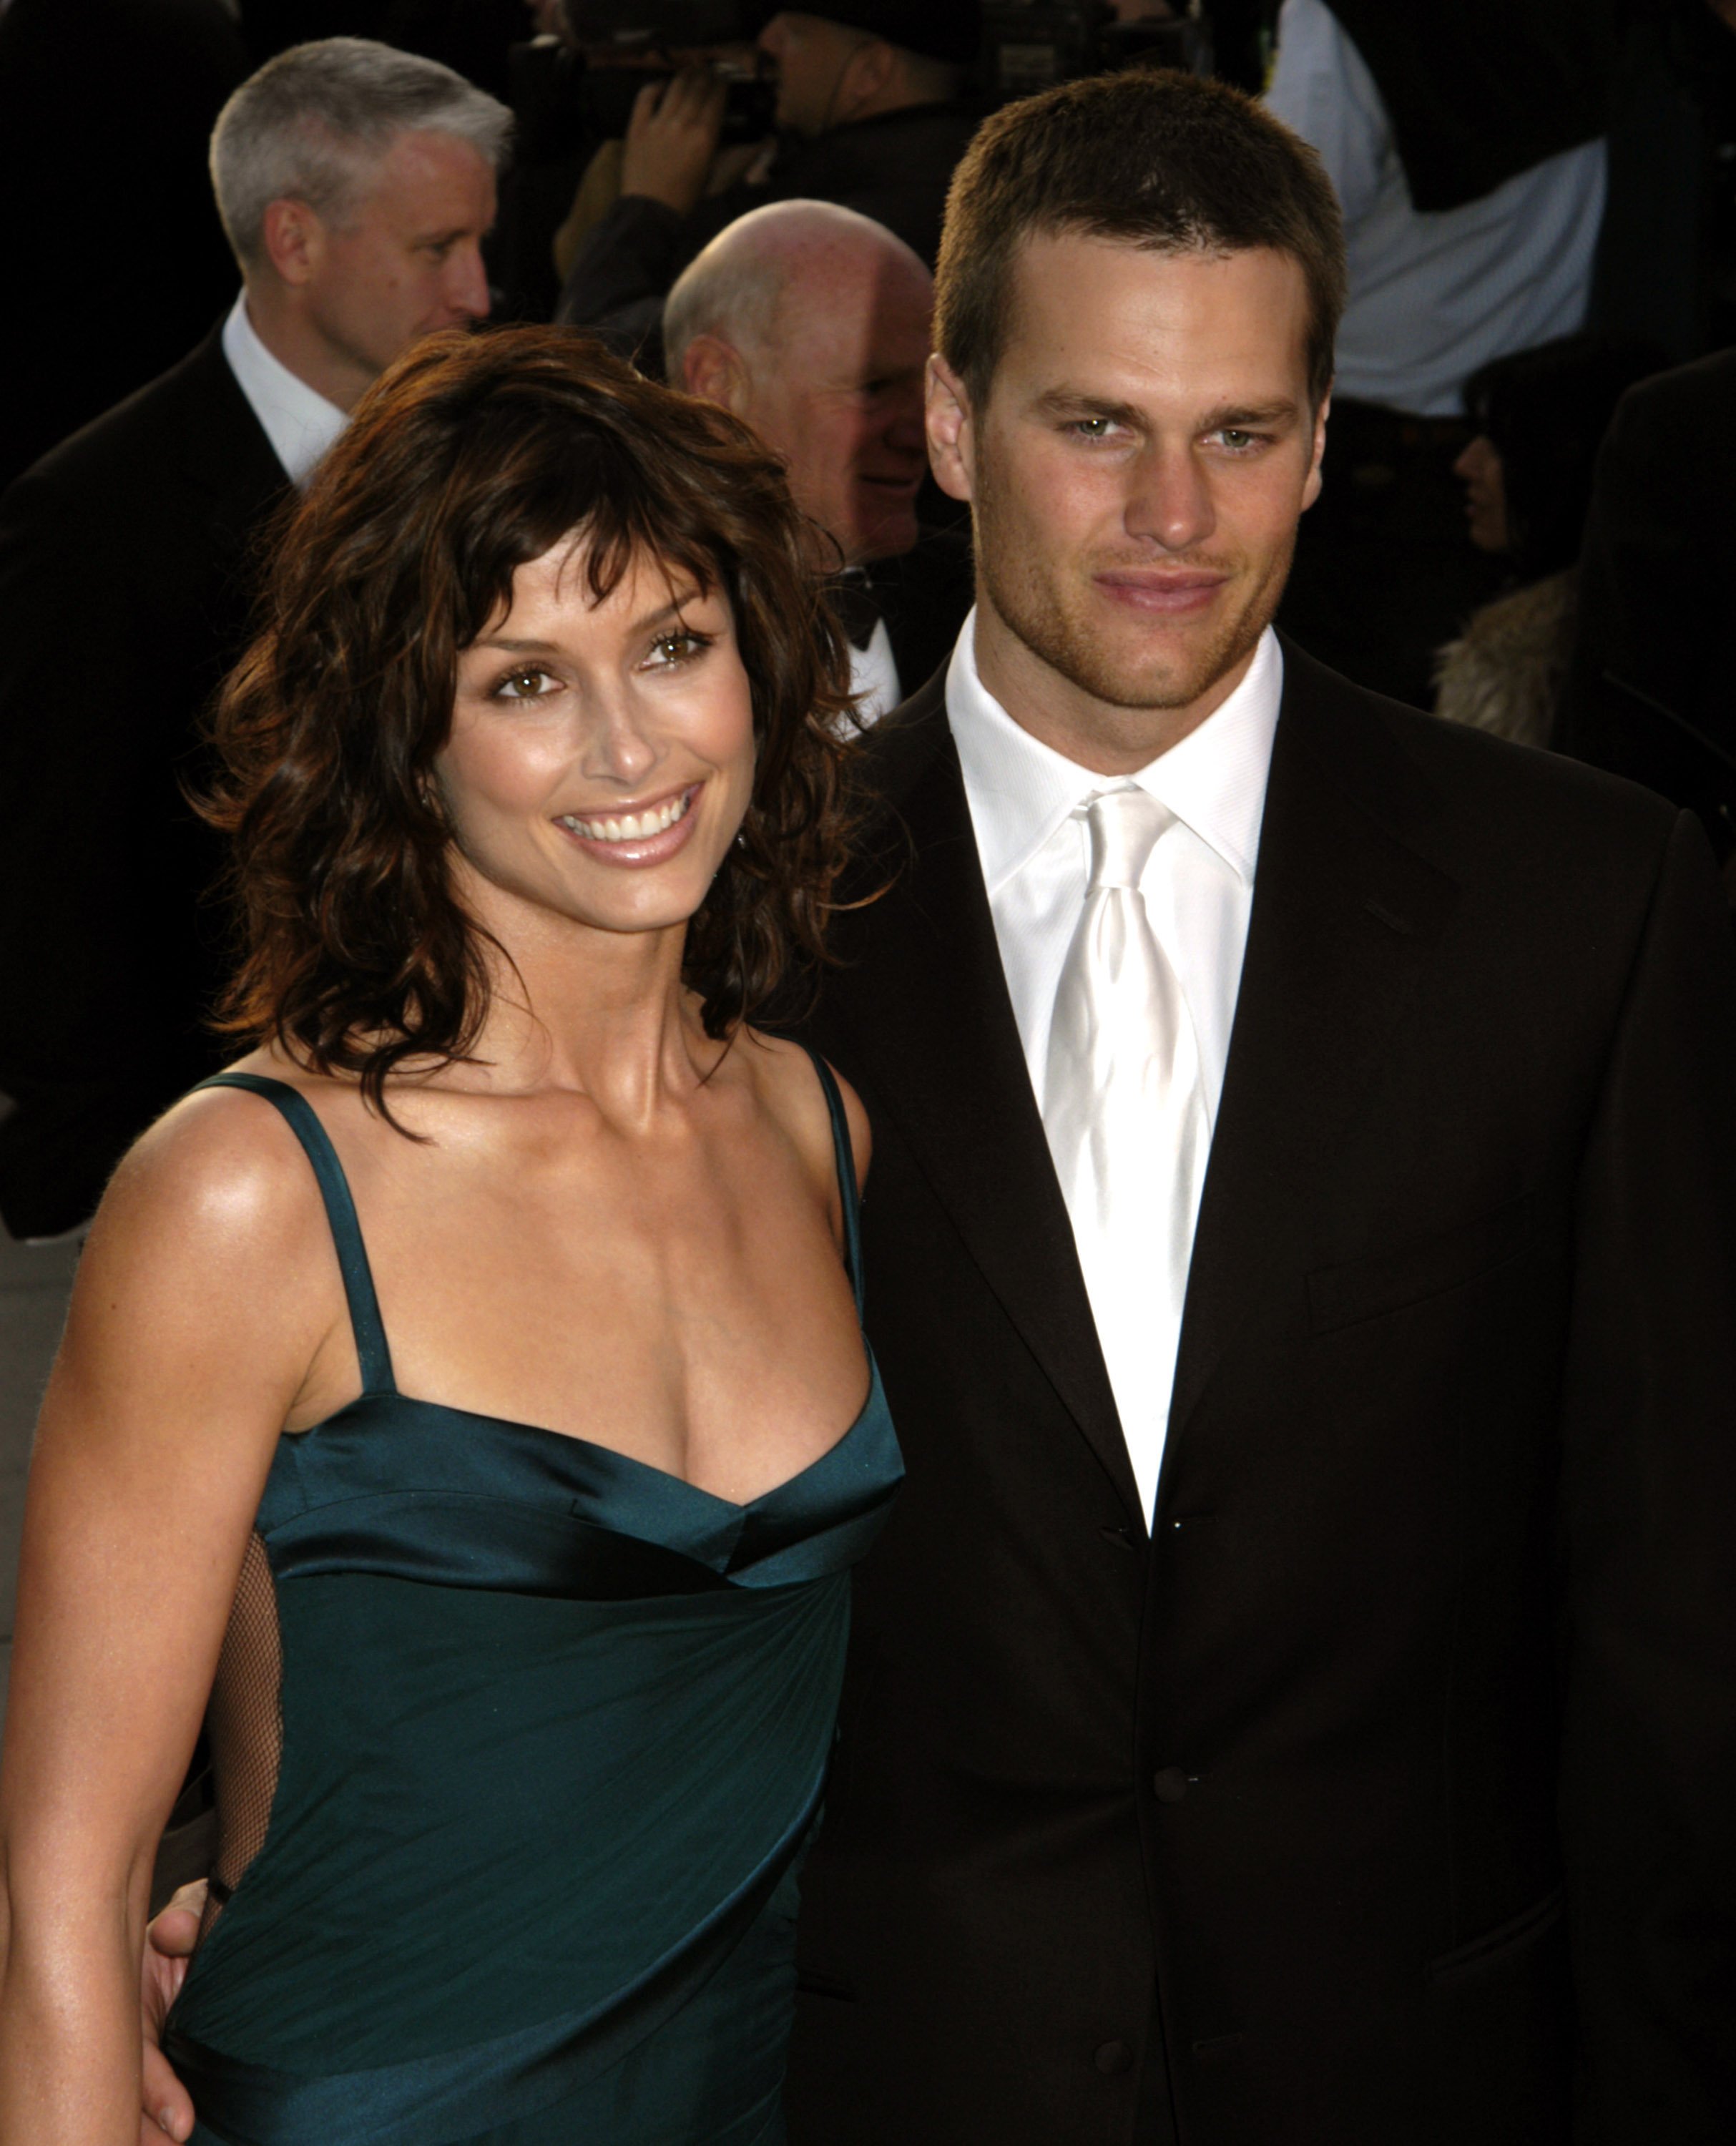 Bridget Moynahan and Tom Brady during 2005 Vanity Fair Oscar Party - Arrivals at Mortons in Los Angeles, California, United States. | Source: Getty Images